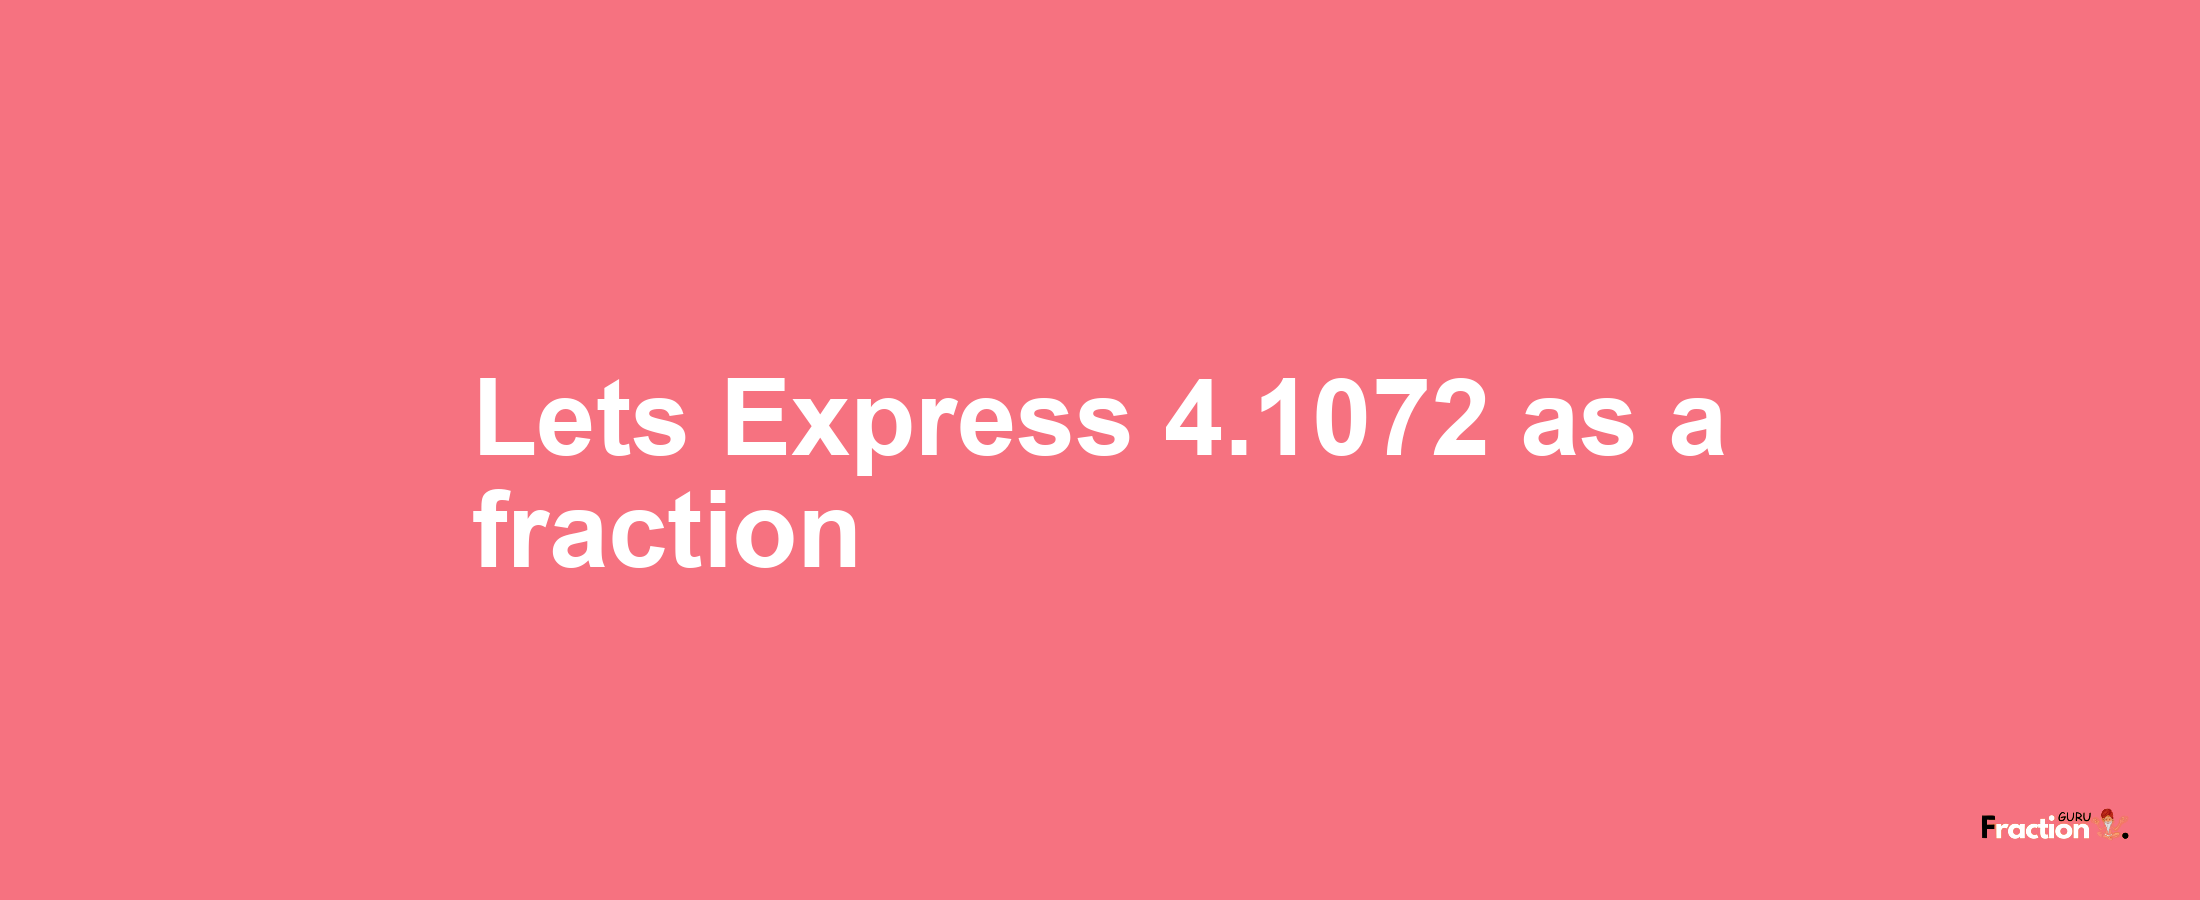 Lets Express 4.1072 as afraction